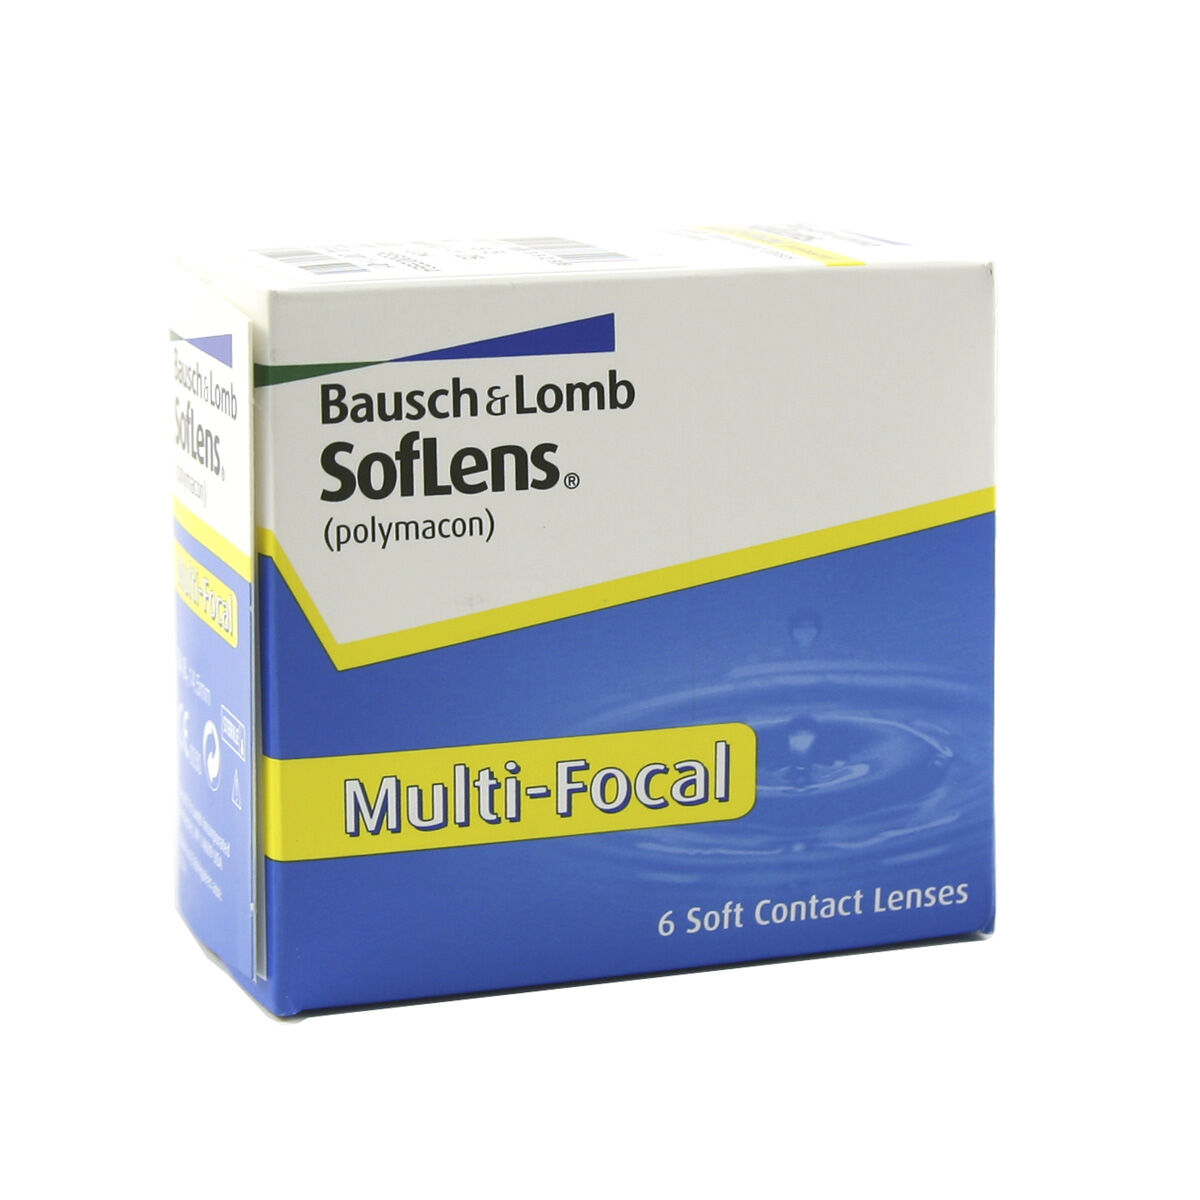 Bausch & Lomb Soflens Multi Focal (6 Contact Lenses), Bausch & Lomb, Multi-Focal Monthly Lenses, Polymacon